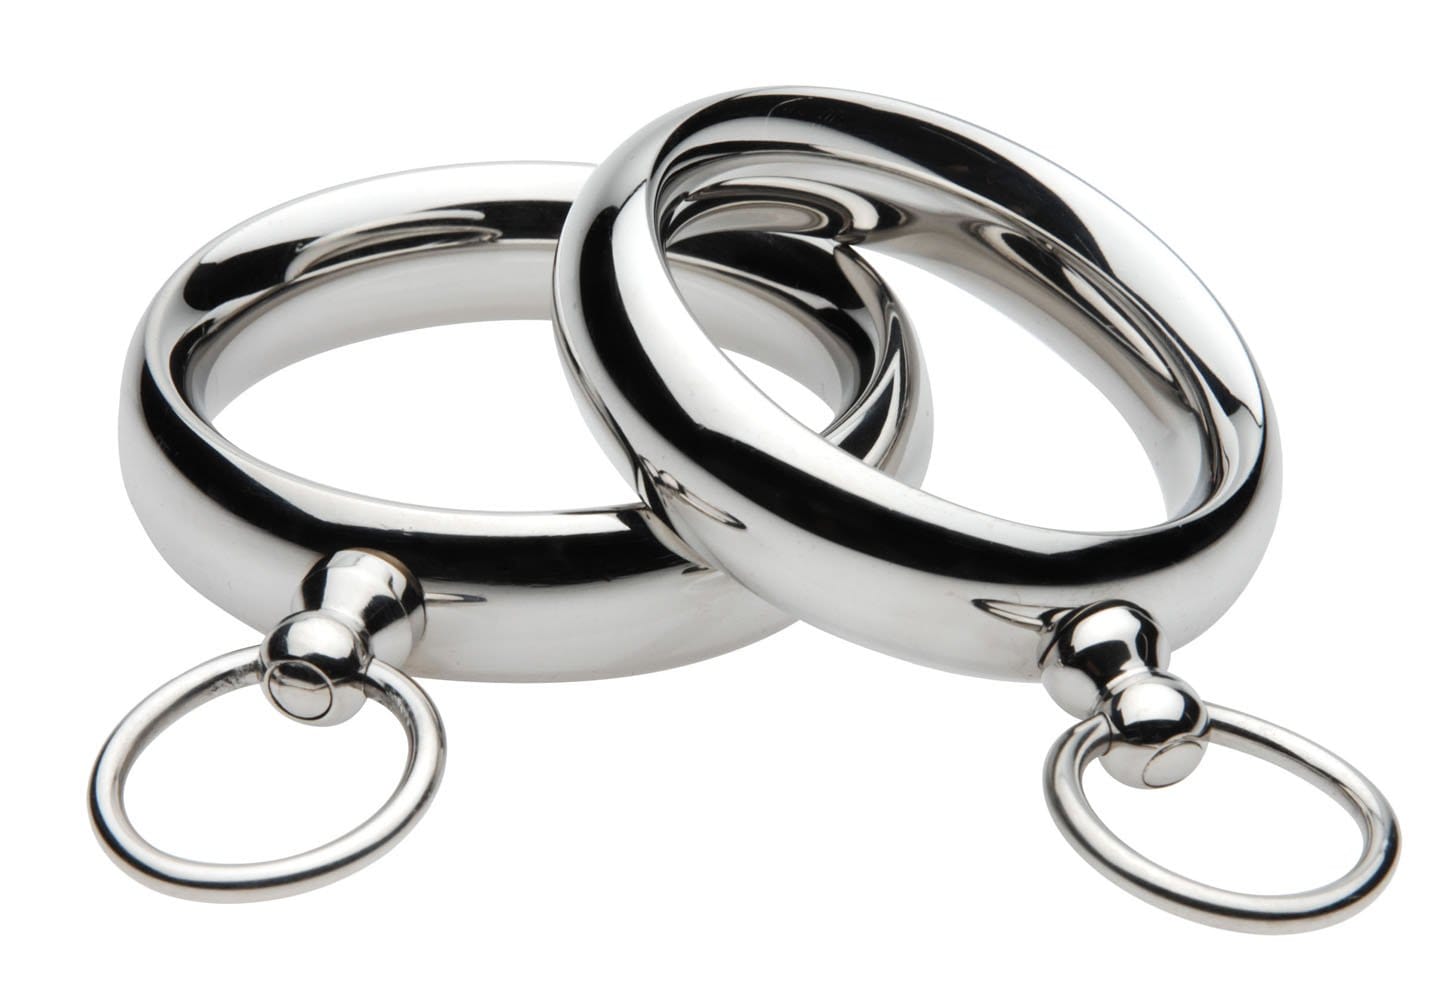 lead me stainless steel cock ring 1 75